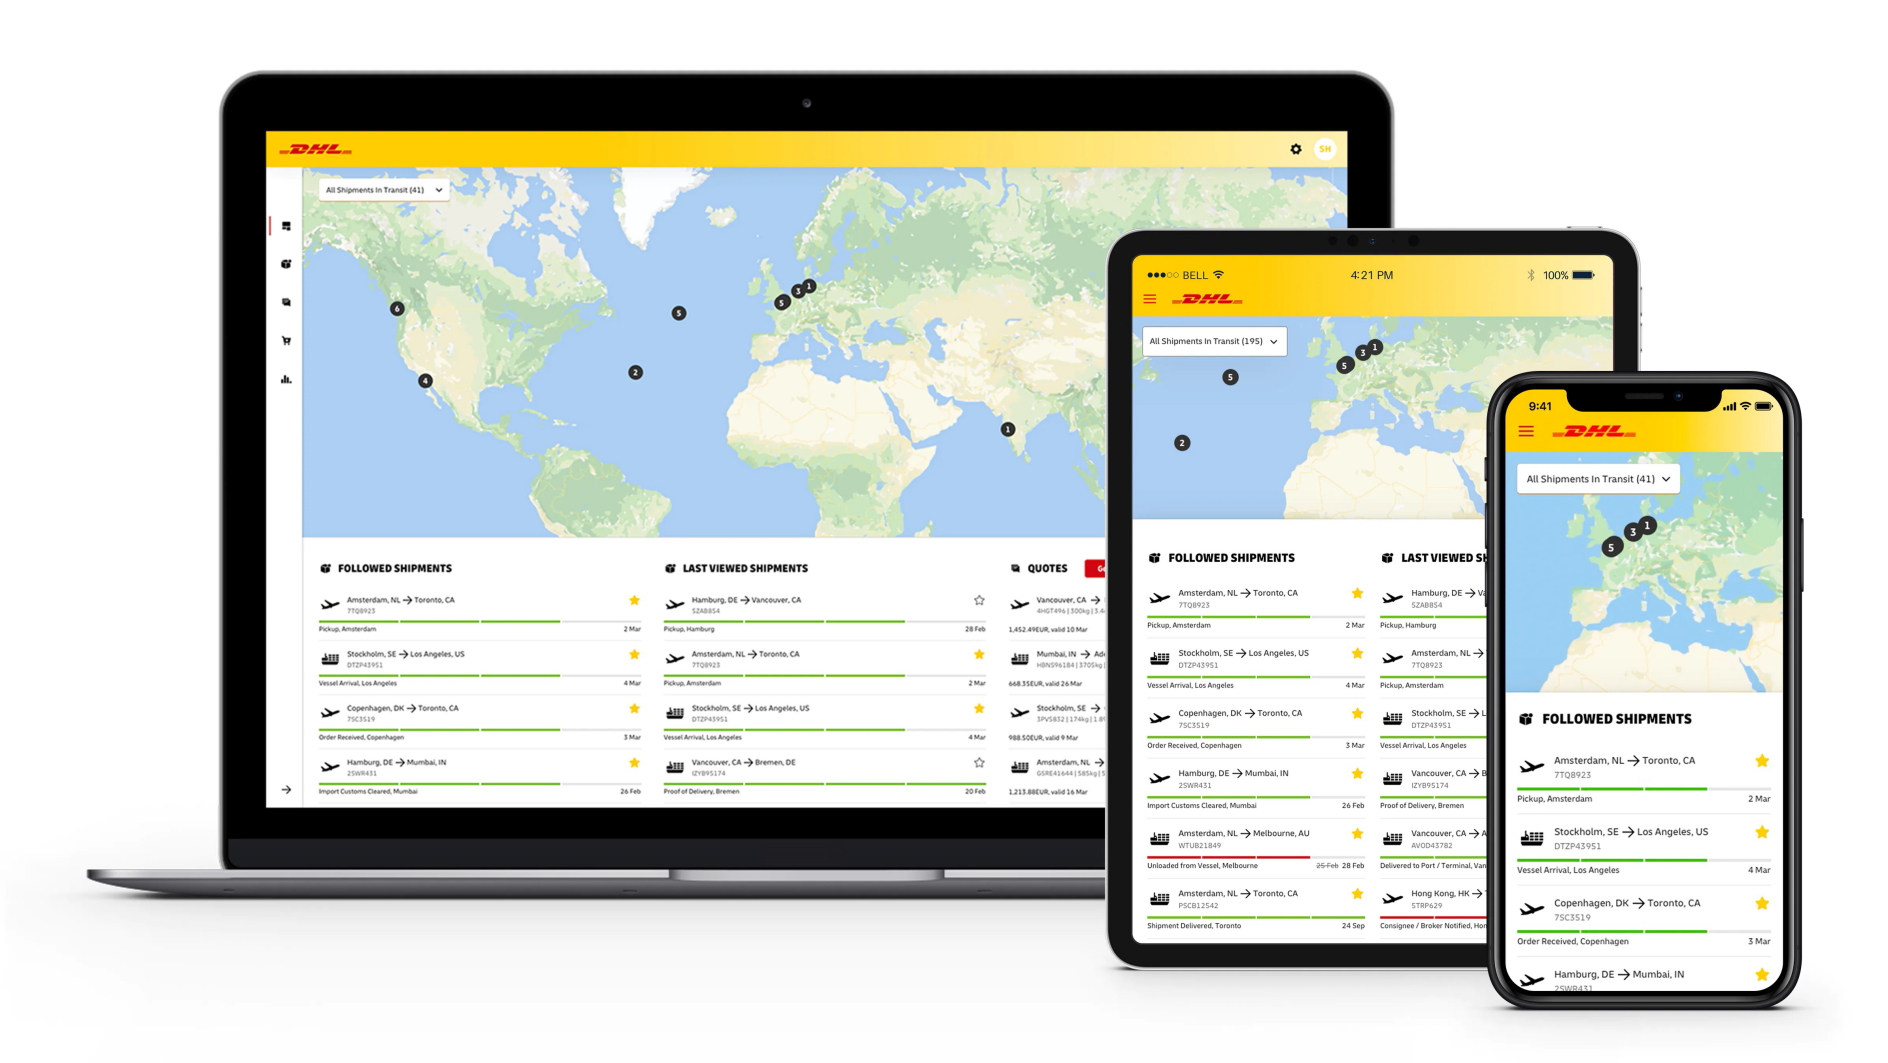 DHL Global Forwarding - Freight, the international freight specialist division of Deutsche Post DHL Group, has upgraded myDHLi with new features and greater functionality. Click to enlarge.